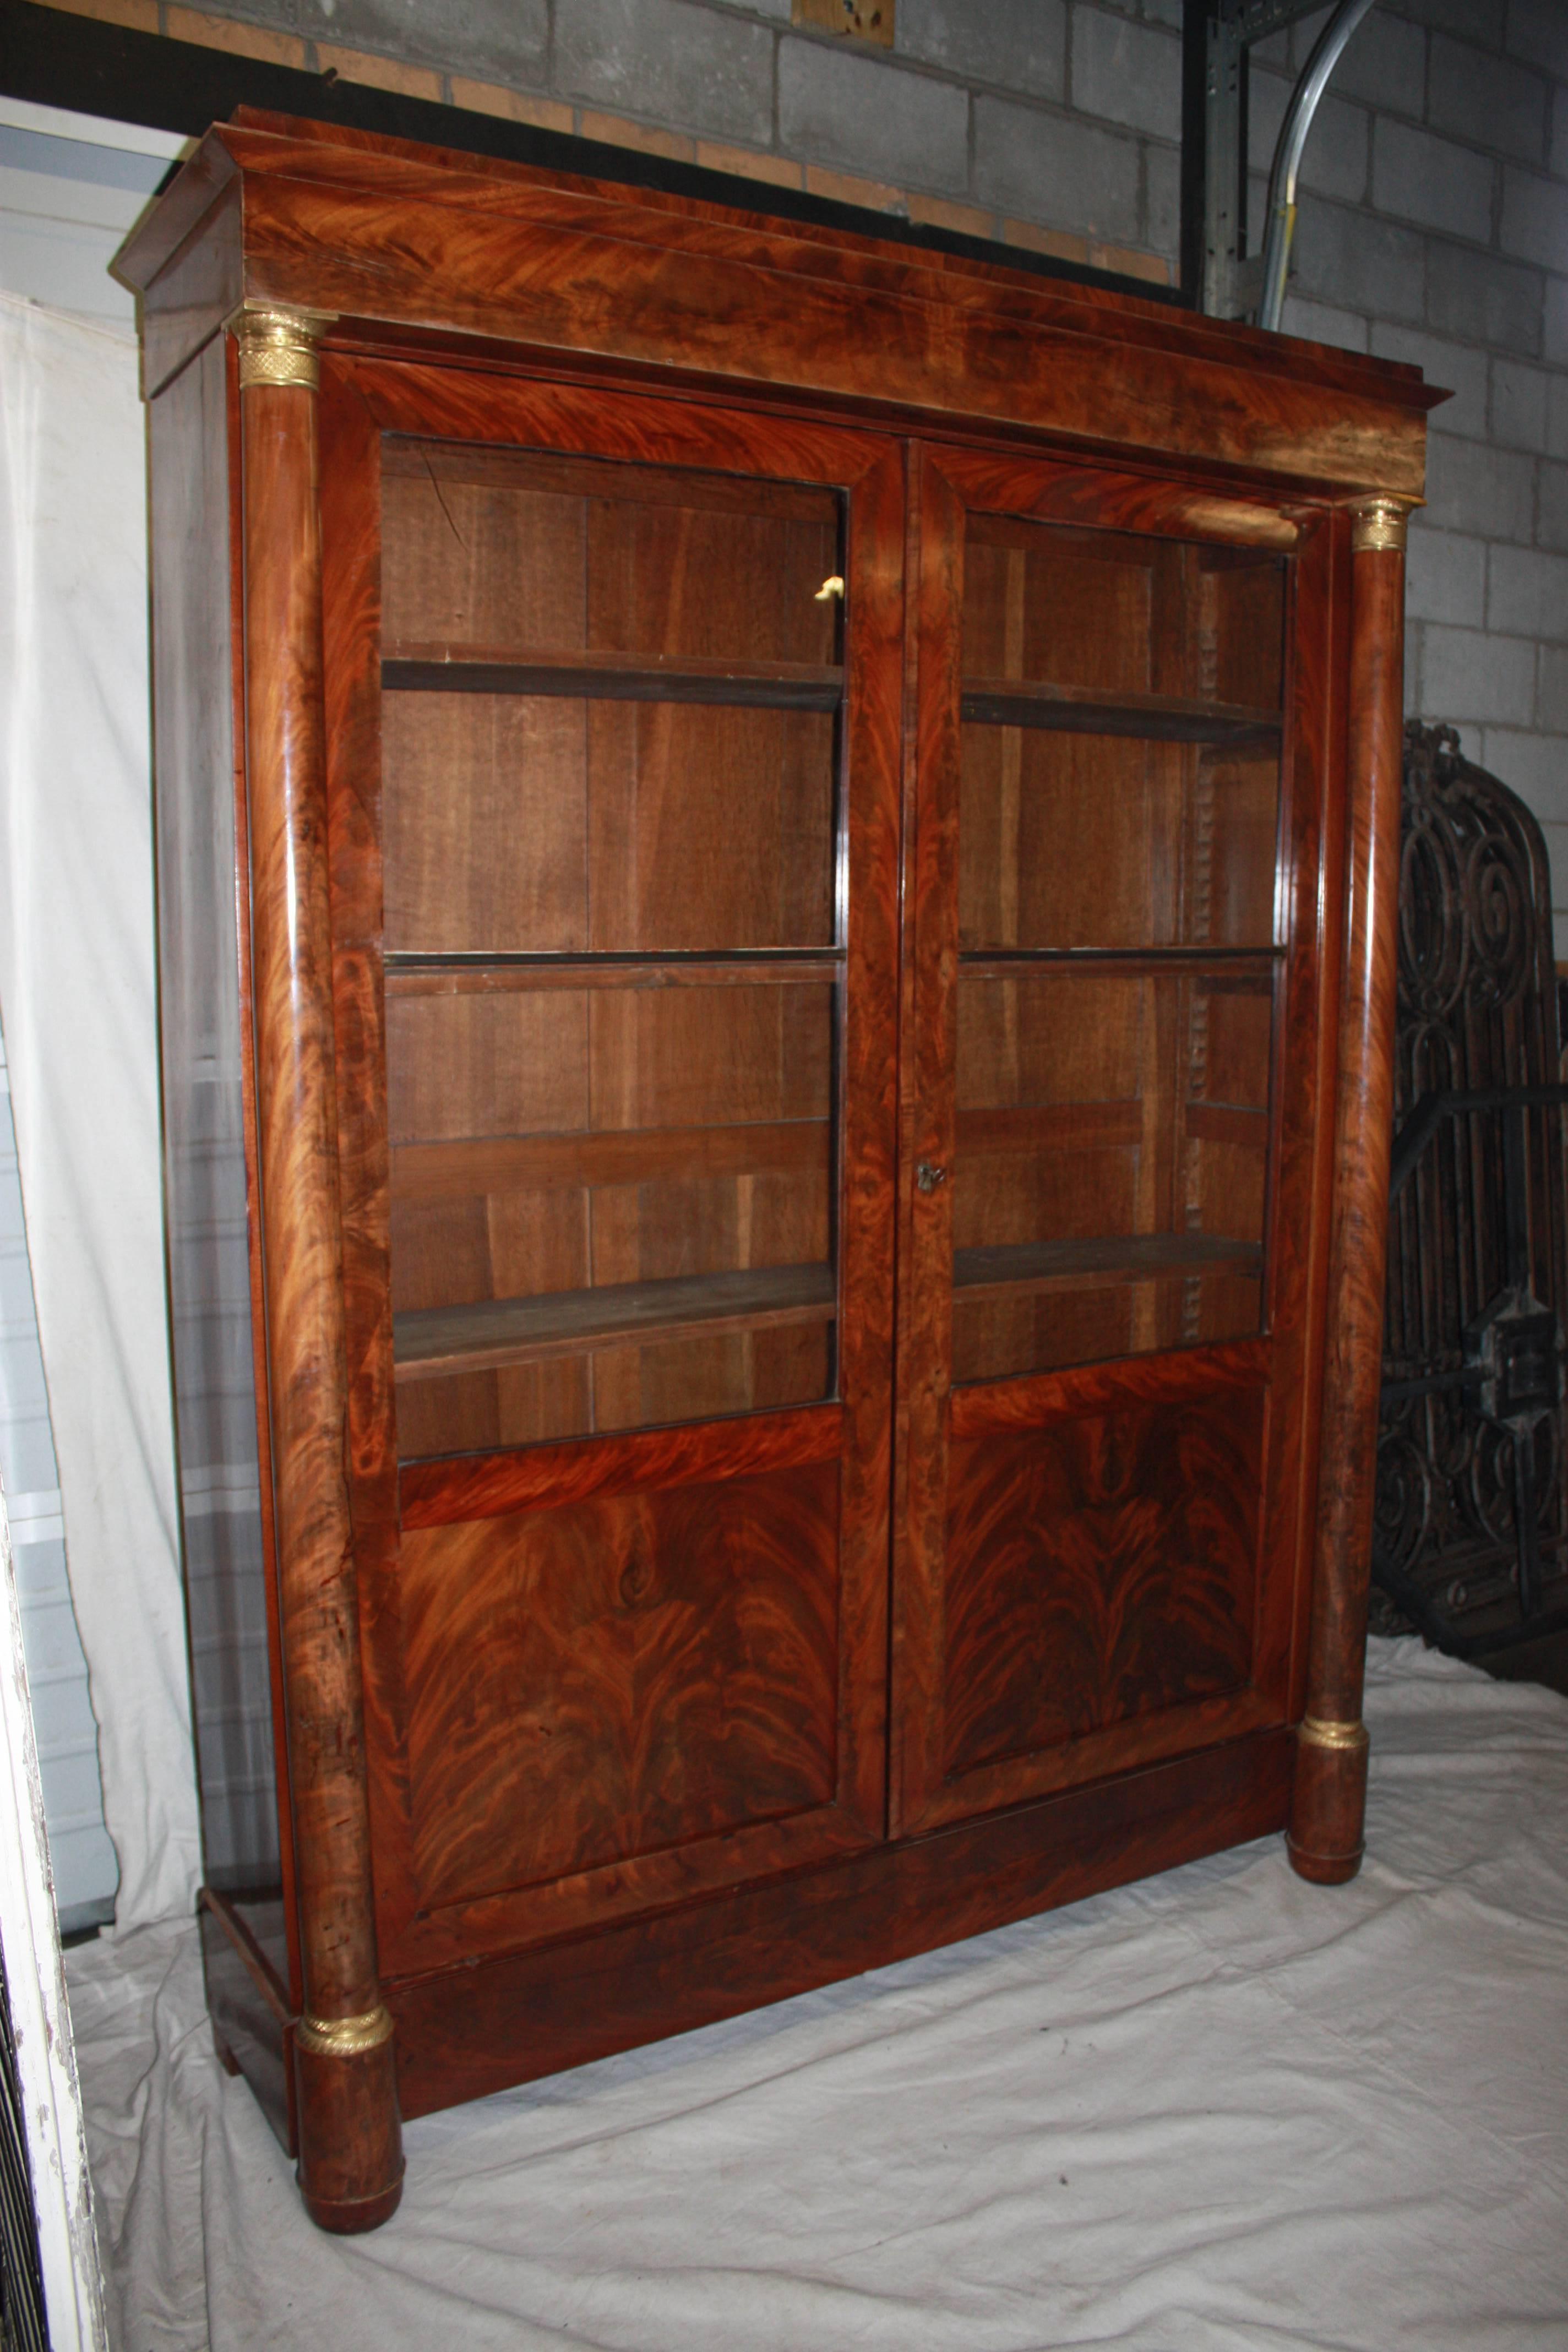 French Empire Period bookcase. Early 19th century, the bookcase wears a beautiful flamed blond mahogany marquetry. Original old window glass.